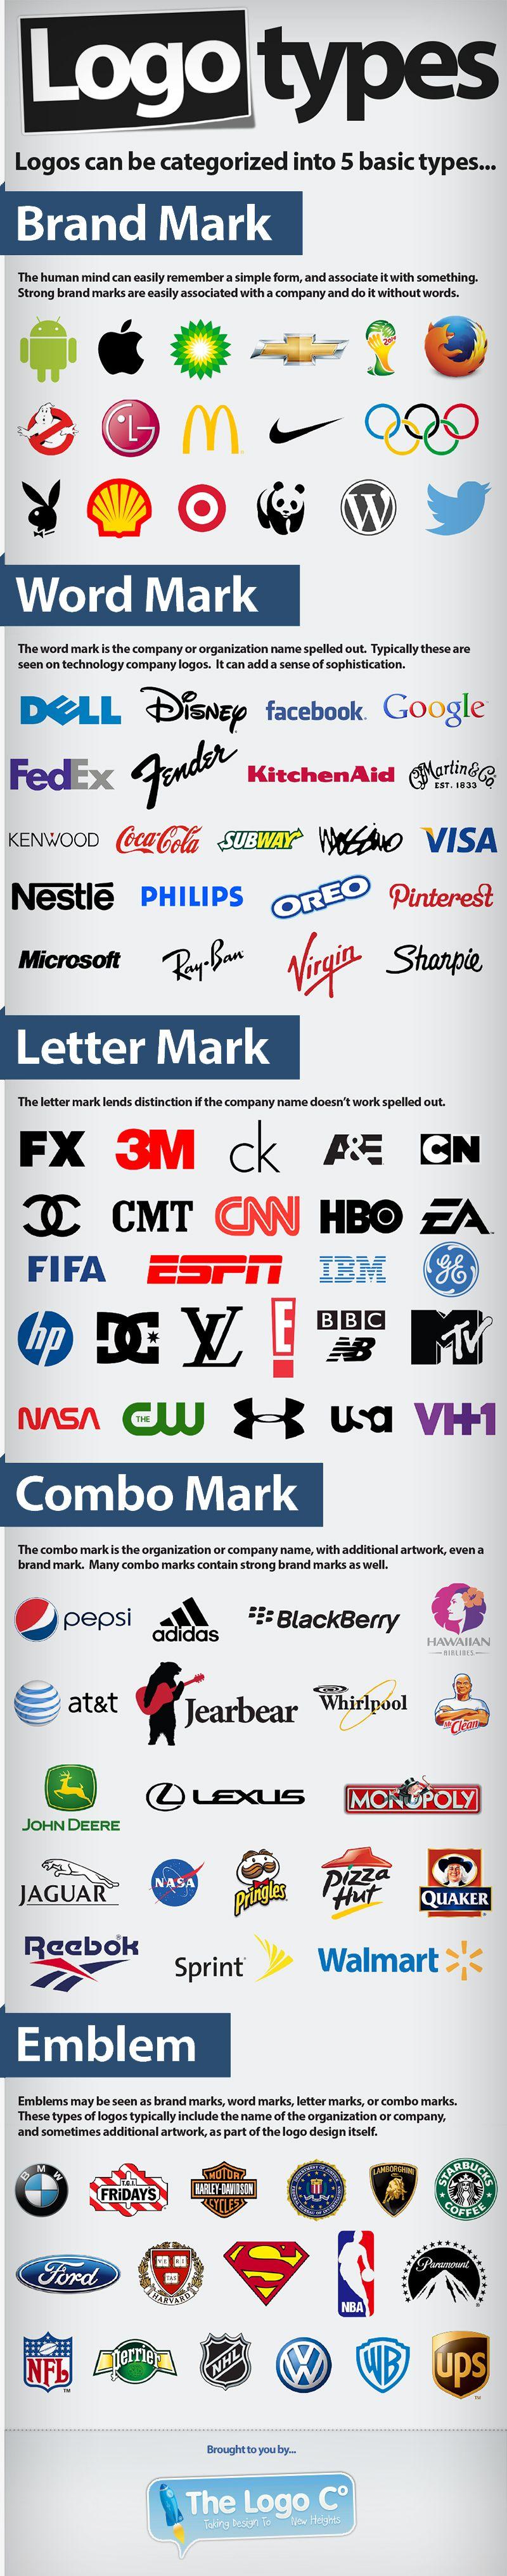 Combomark Logo - The 5 Logo Styles - What's Yours? - The Logo Company